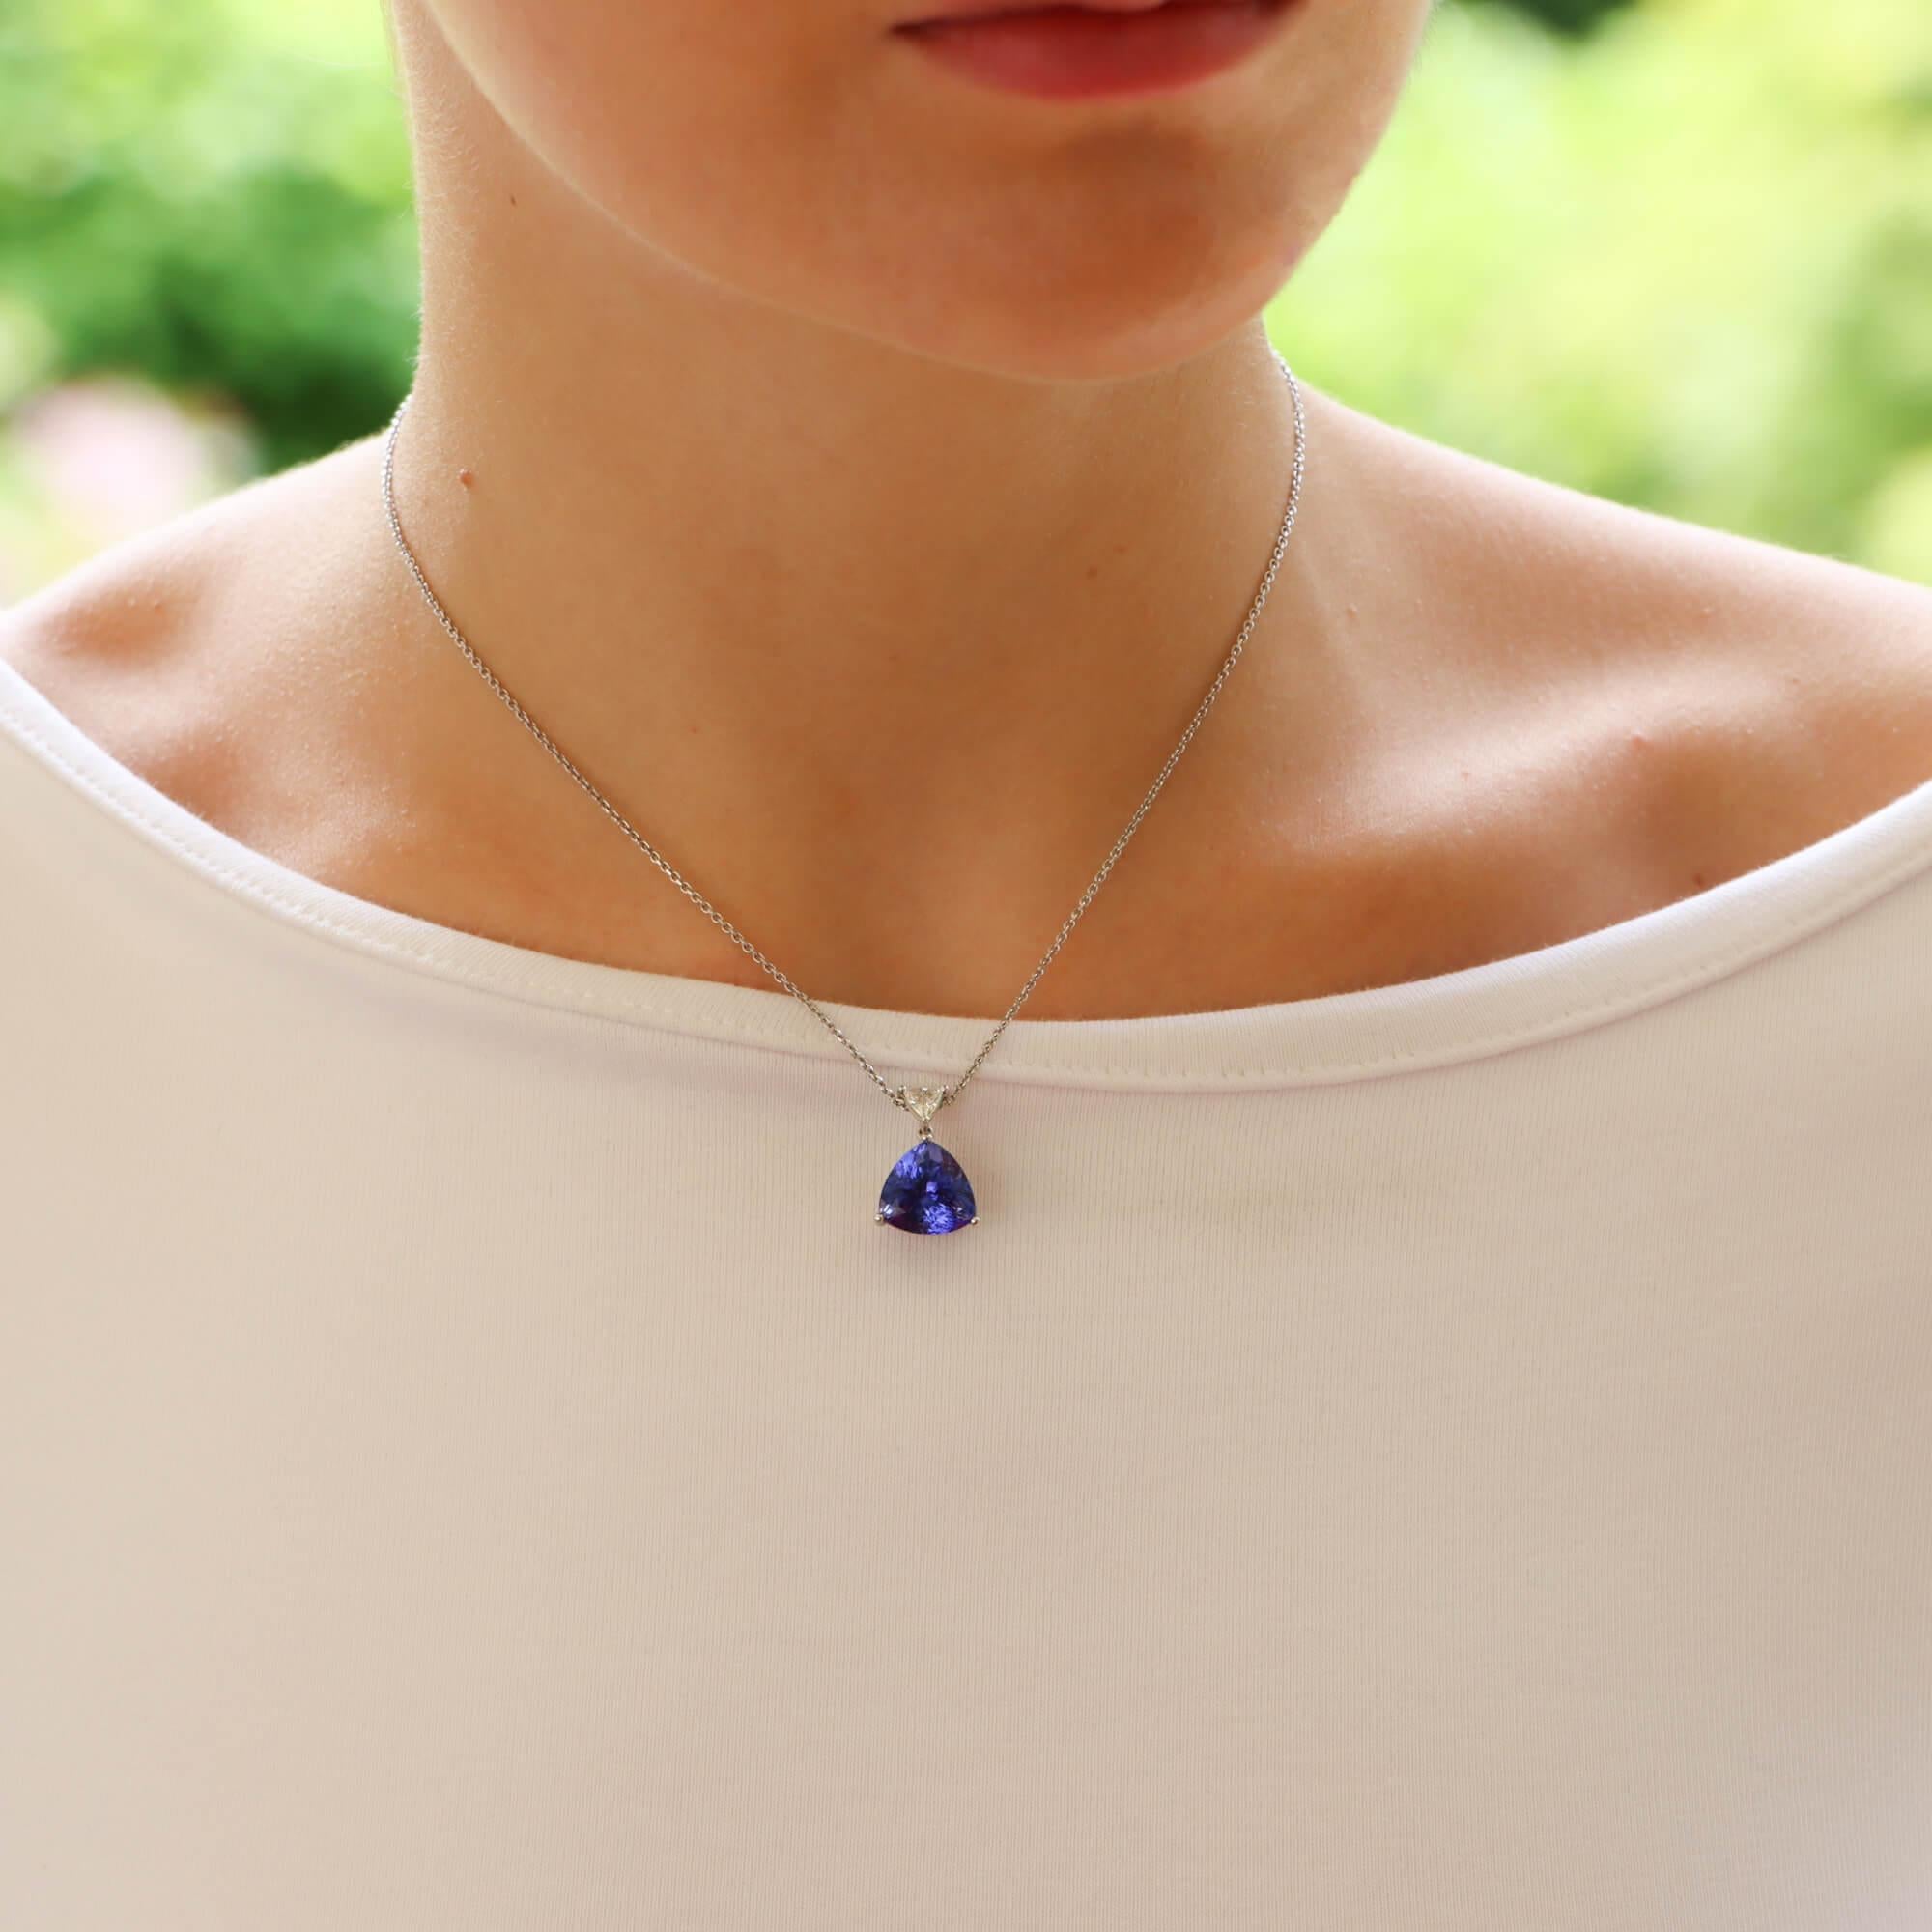 A beautiful contemporary diamond and tanzanite drop pendant necklace set in 18k white gold.

This beautiful necklace predominately features a trilliant cut tanzanite stone which is securely three claw set in a minimalistic open back setting. The